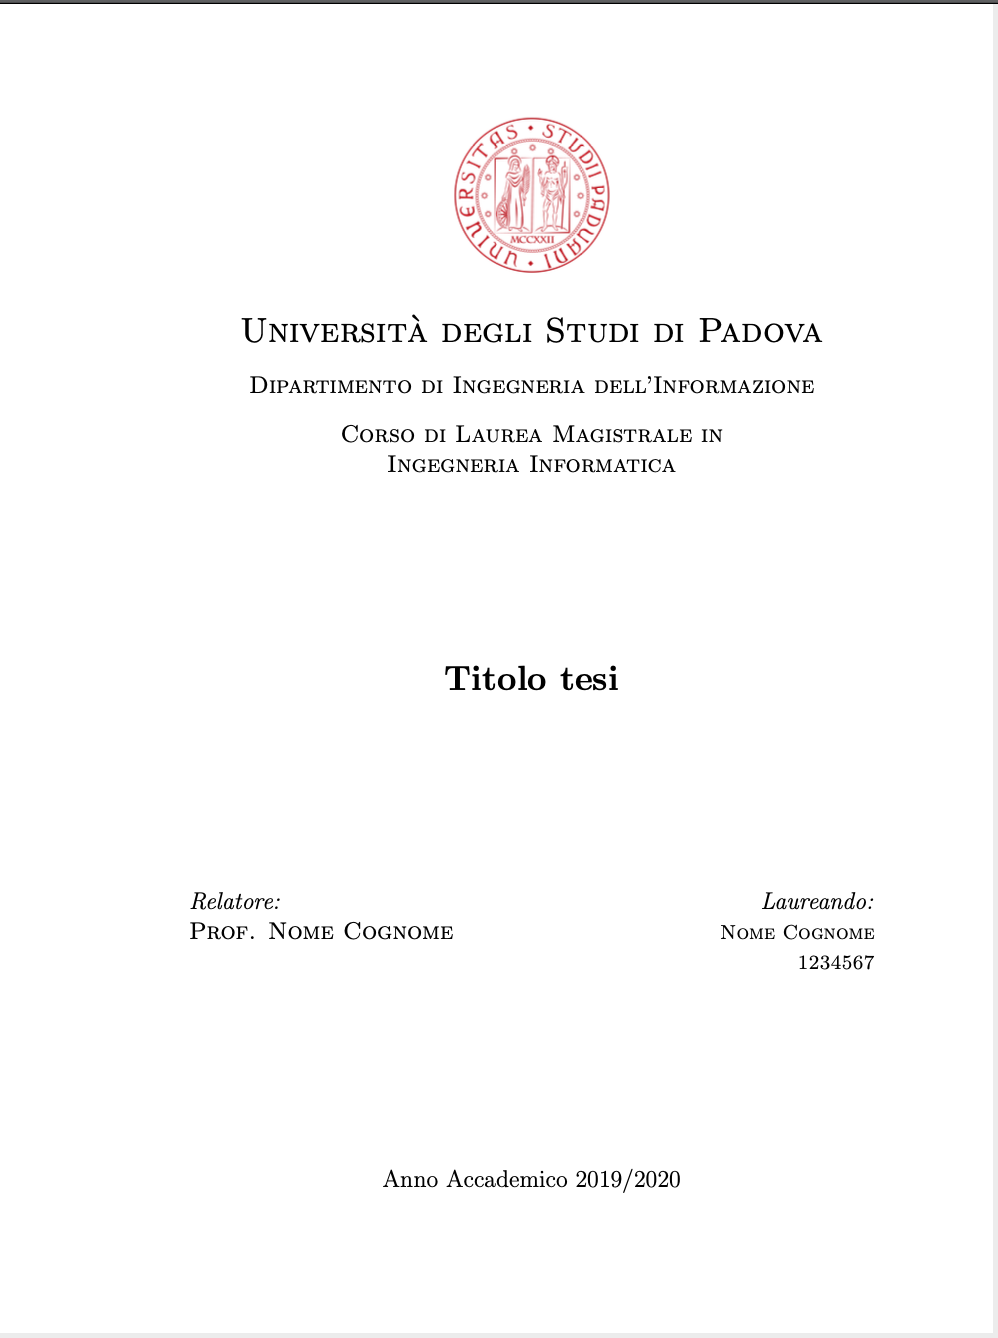 thesis archive unipd